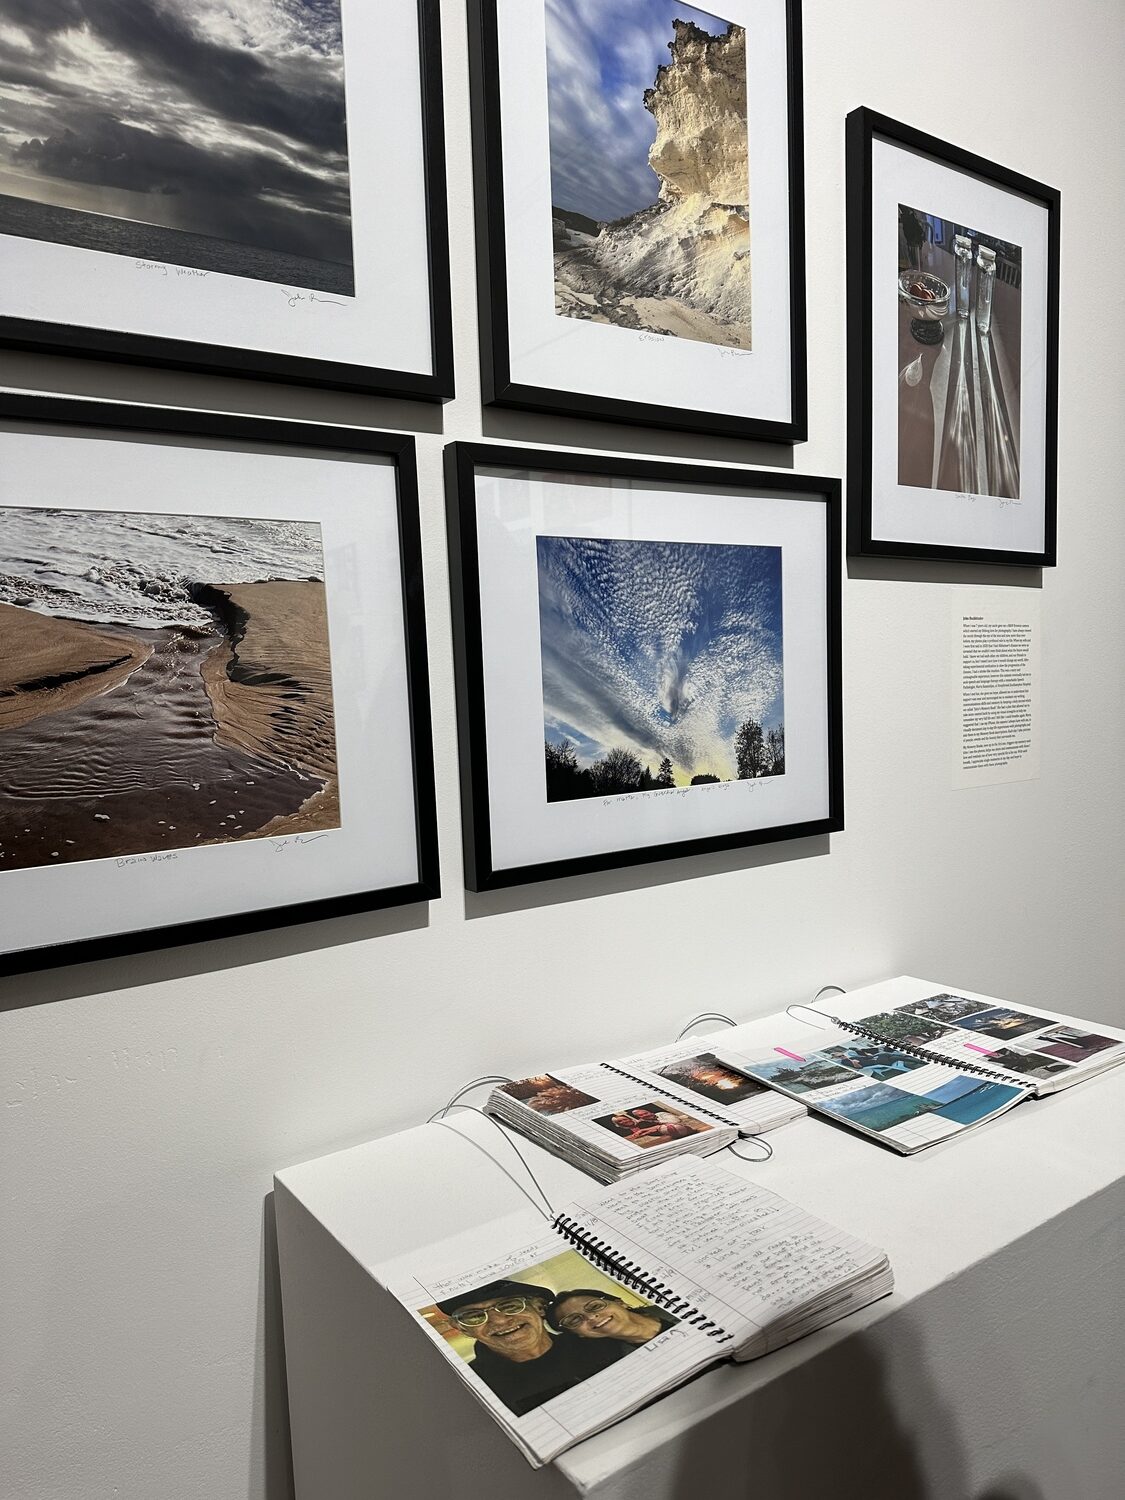 John Buchbinder's photography is on view as part of the exhibit 